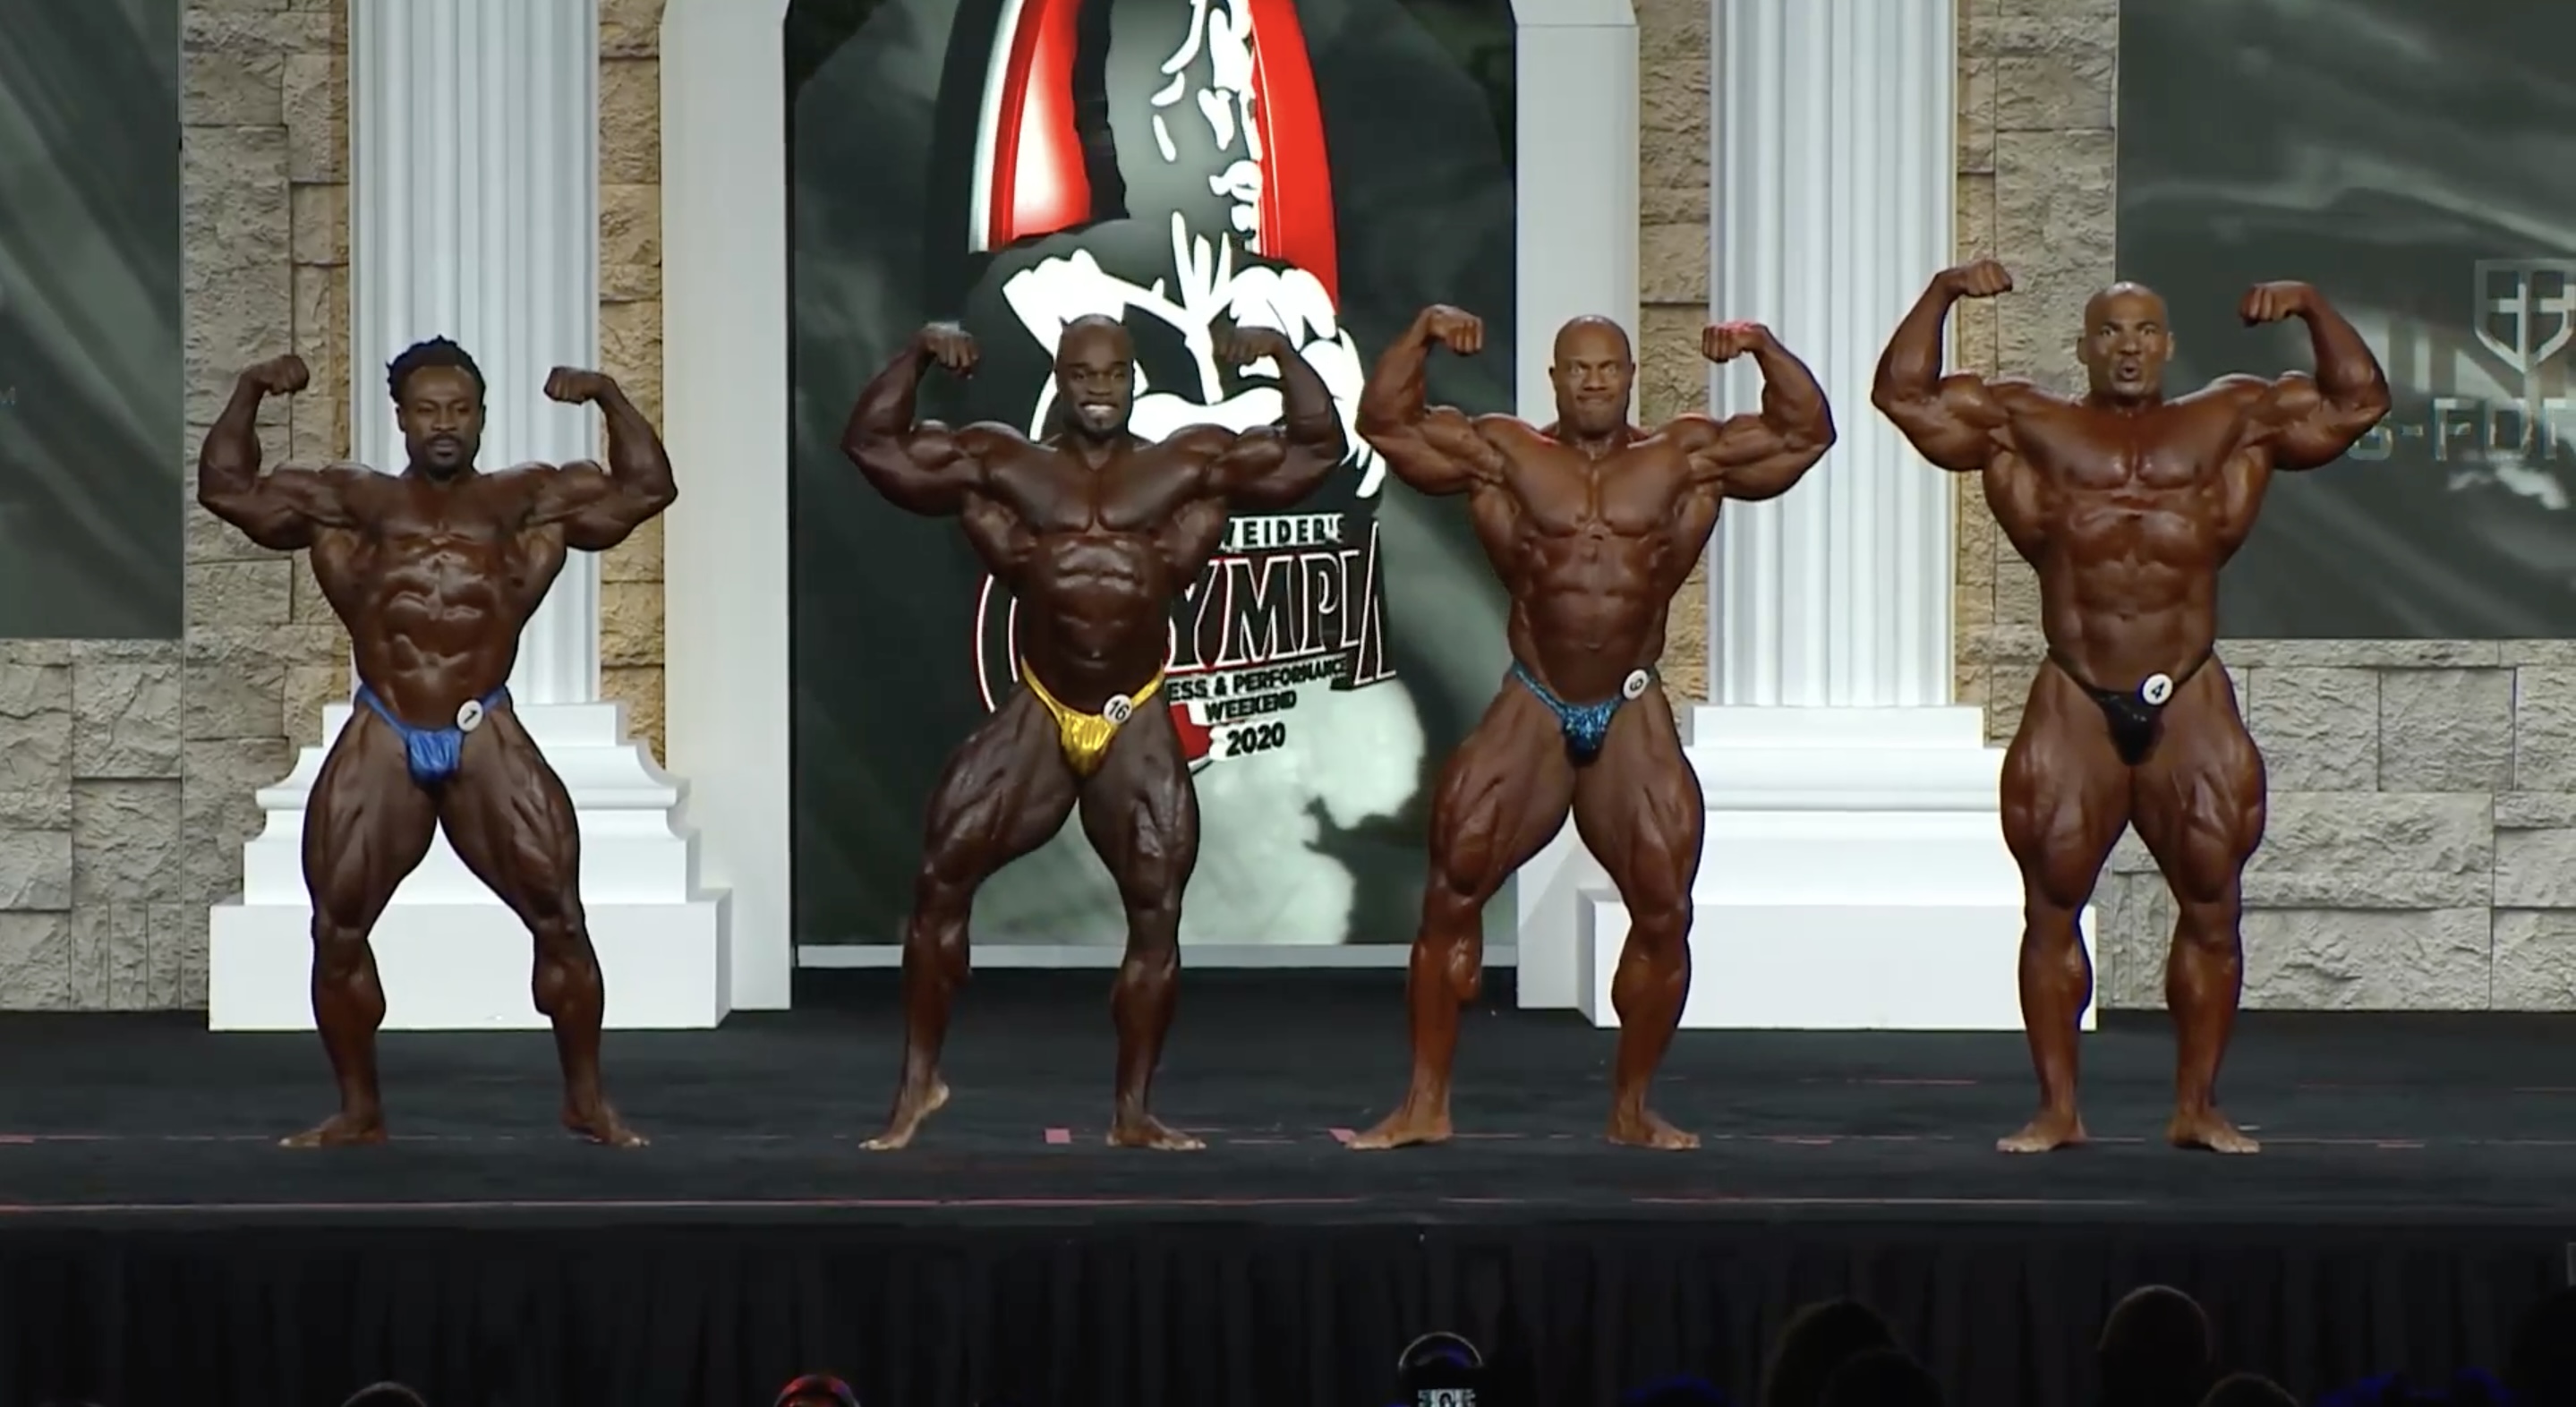 Mr. Olympia 2020 4th Callout